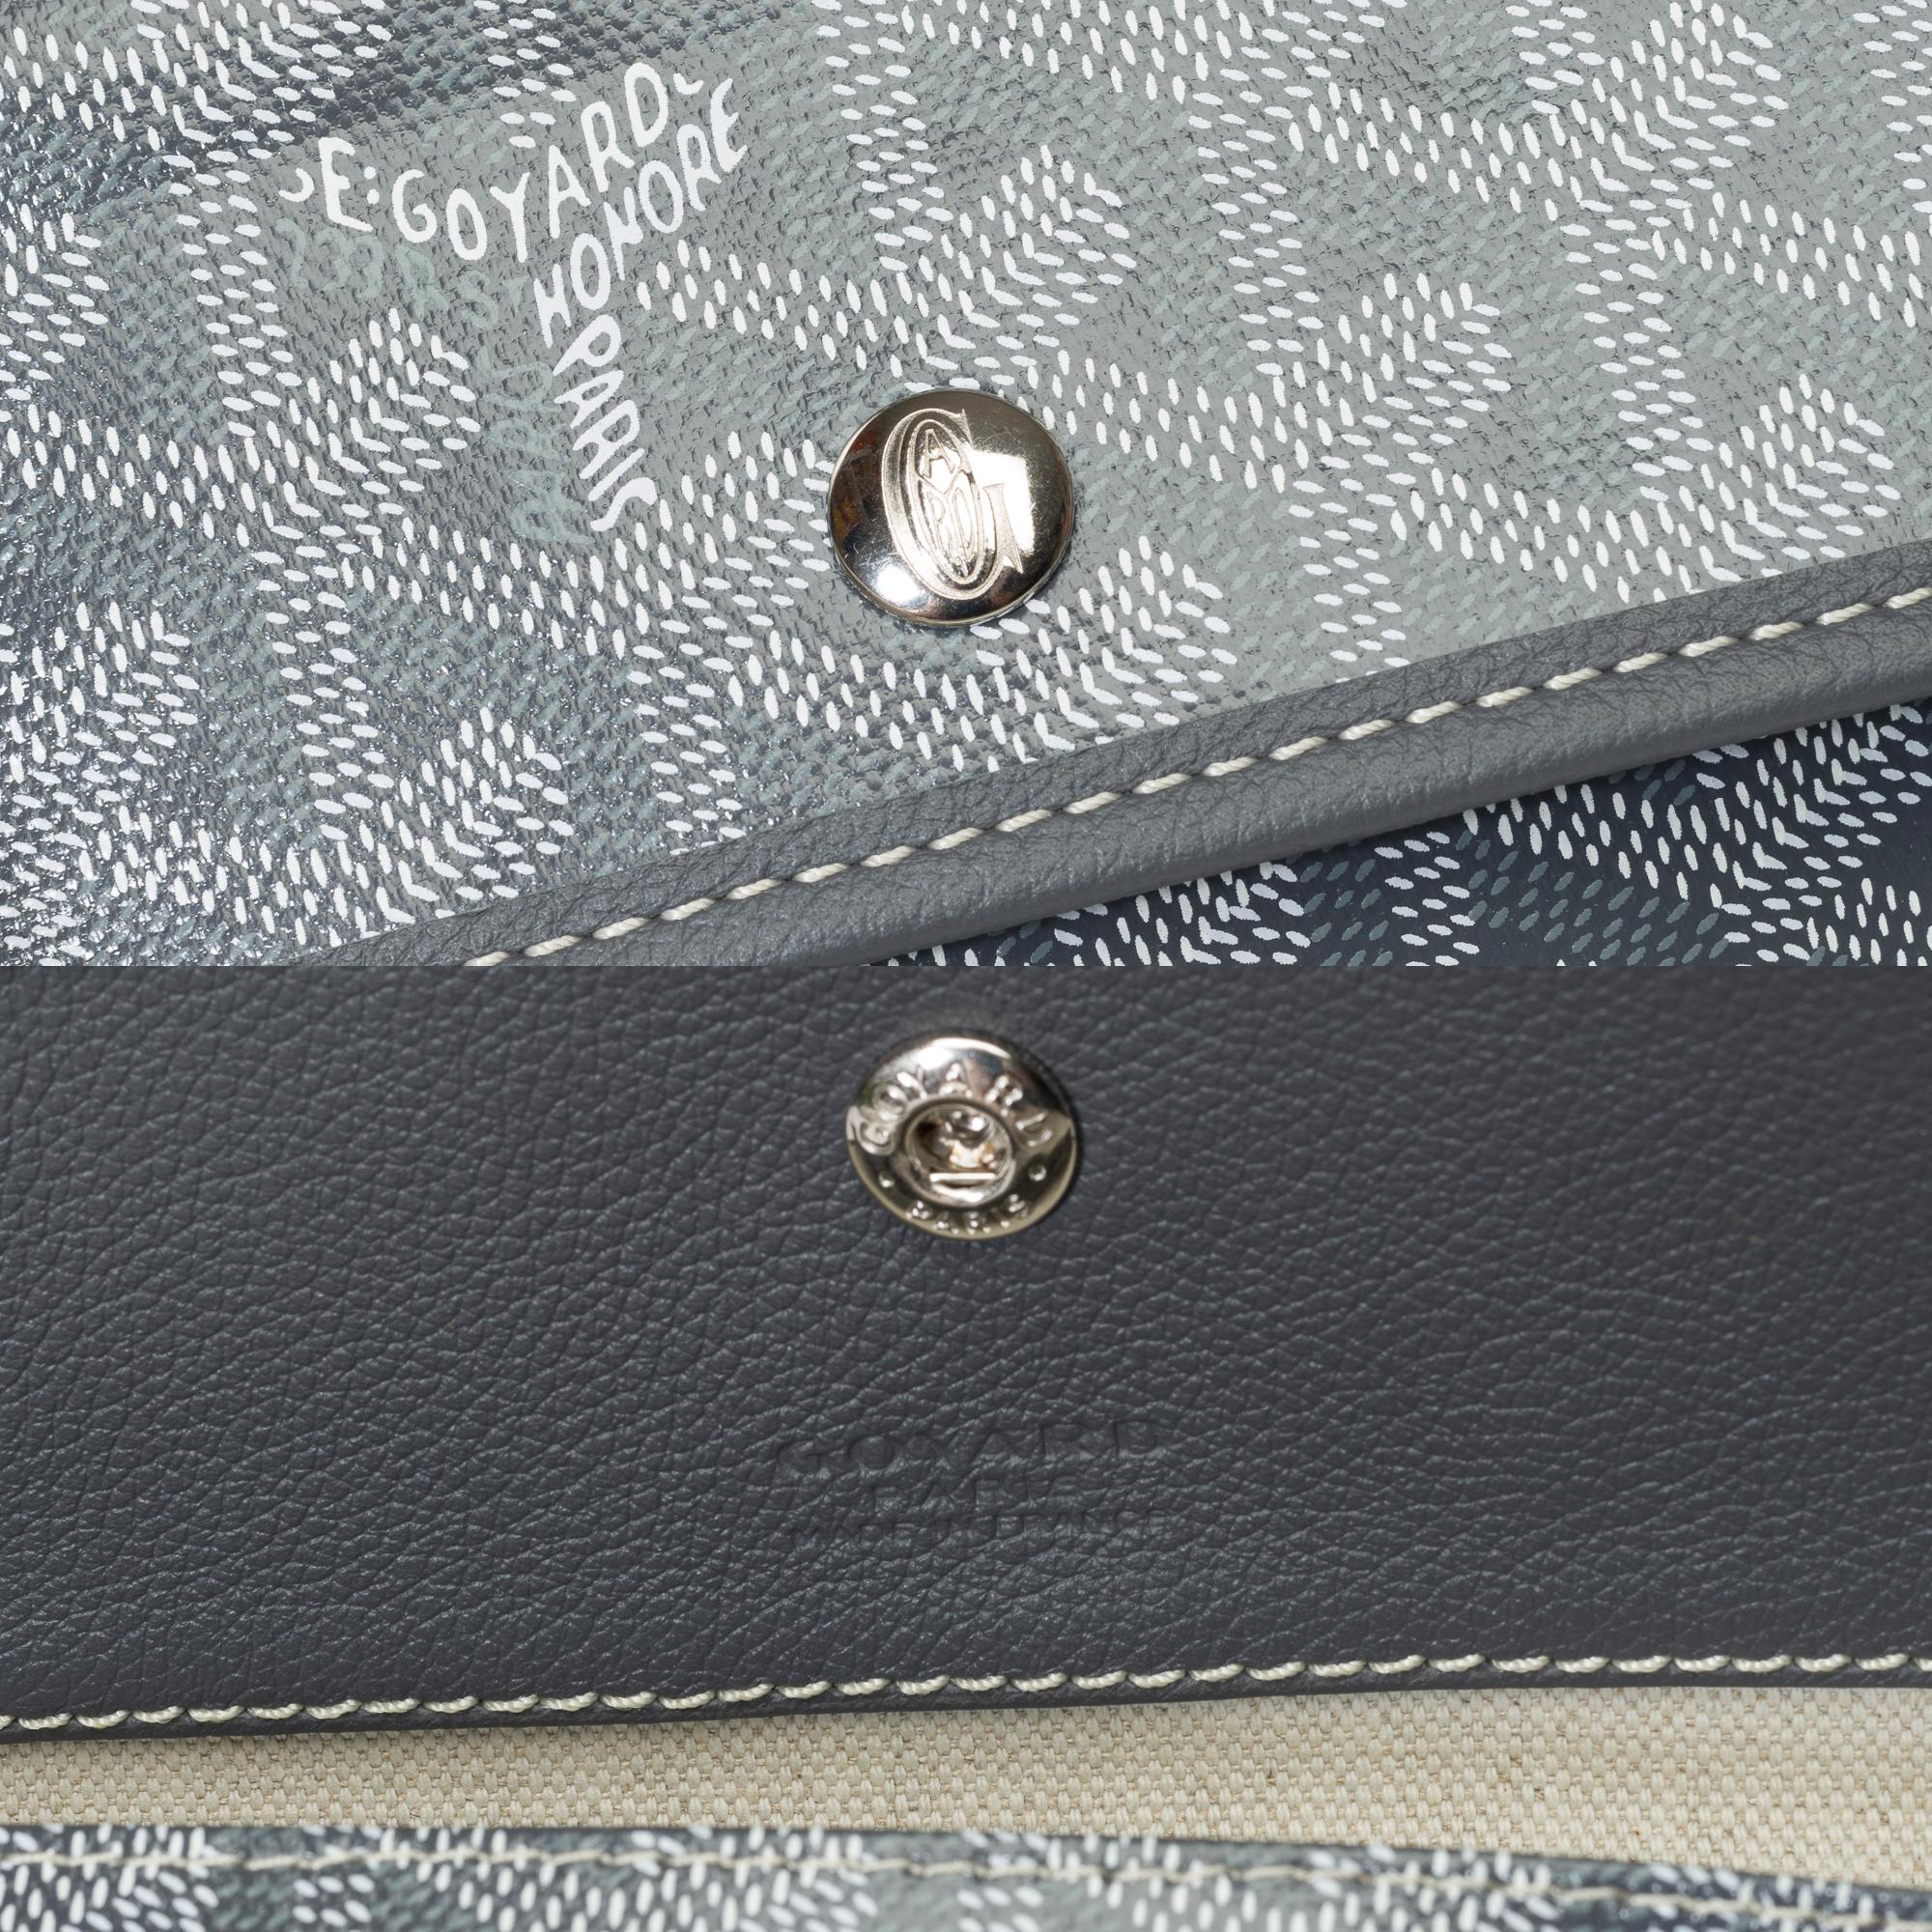 New Goyard Saint-Louis Pouch in grey and white canvas, SHW For Sale 3